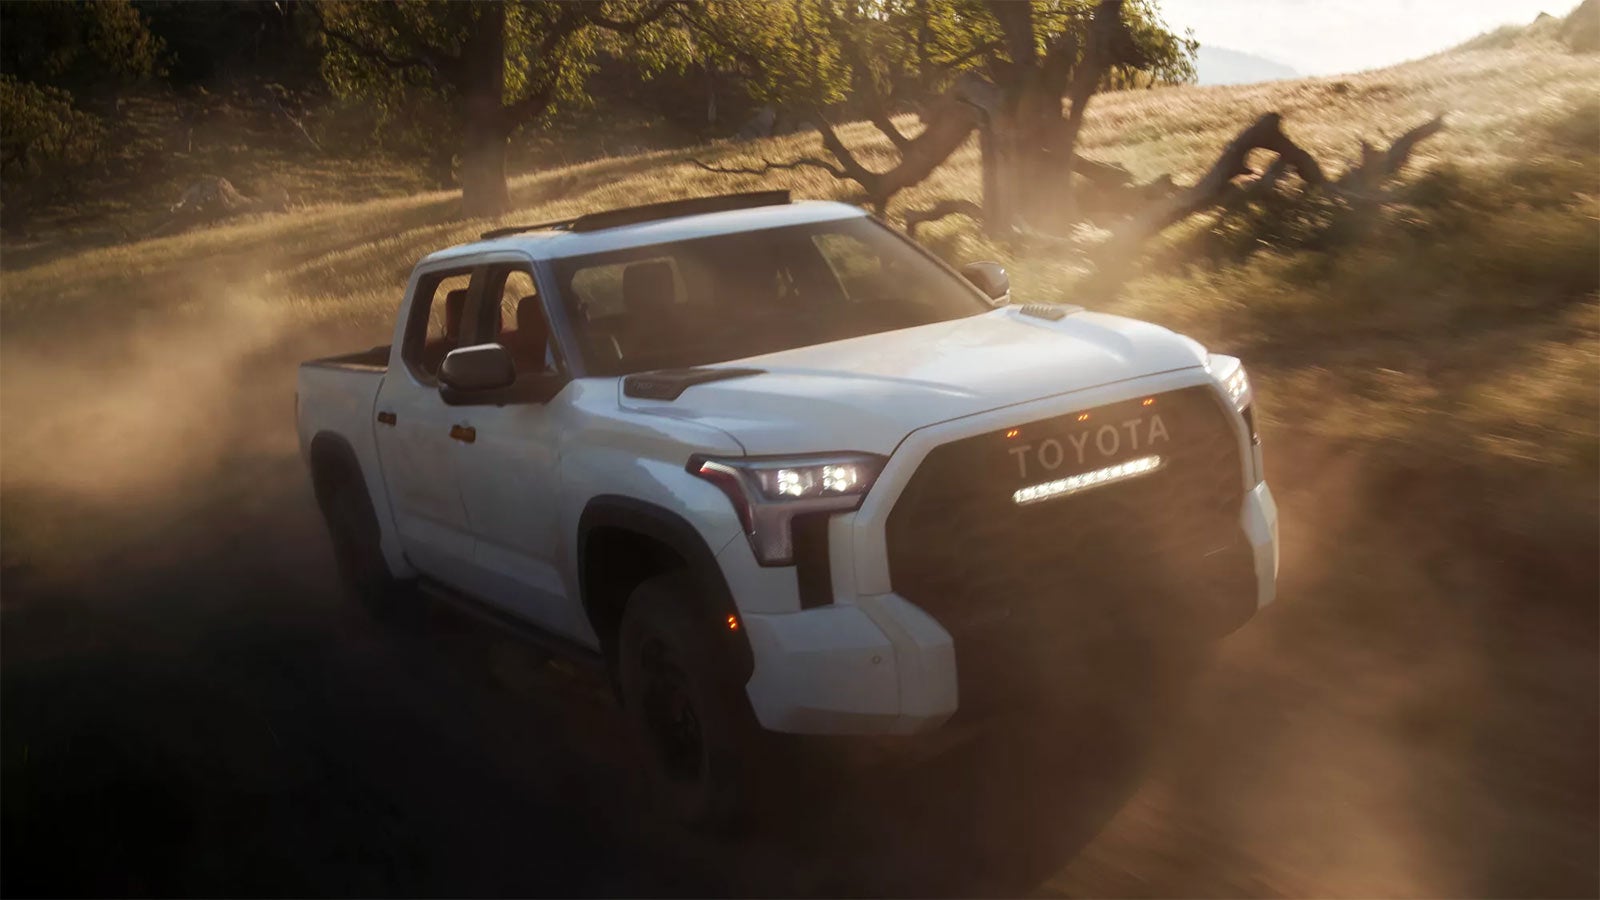 2022 Toyota Tundra Gallery | Koons Annapolis Toyota in Annapolis MD